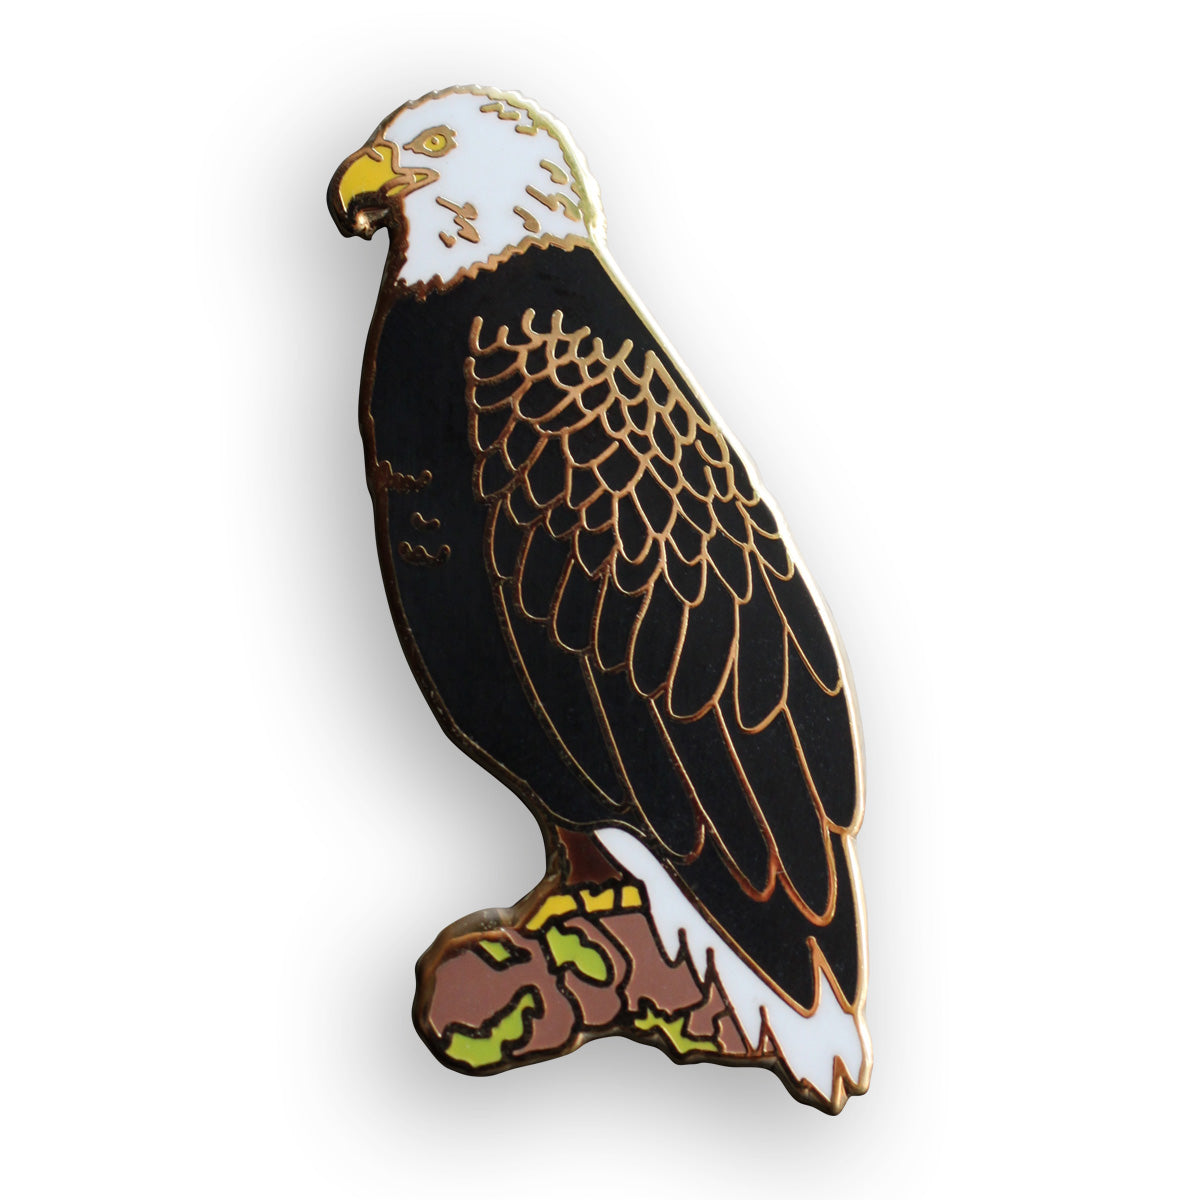 Pin on Eagles